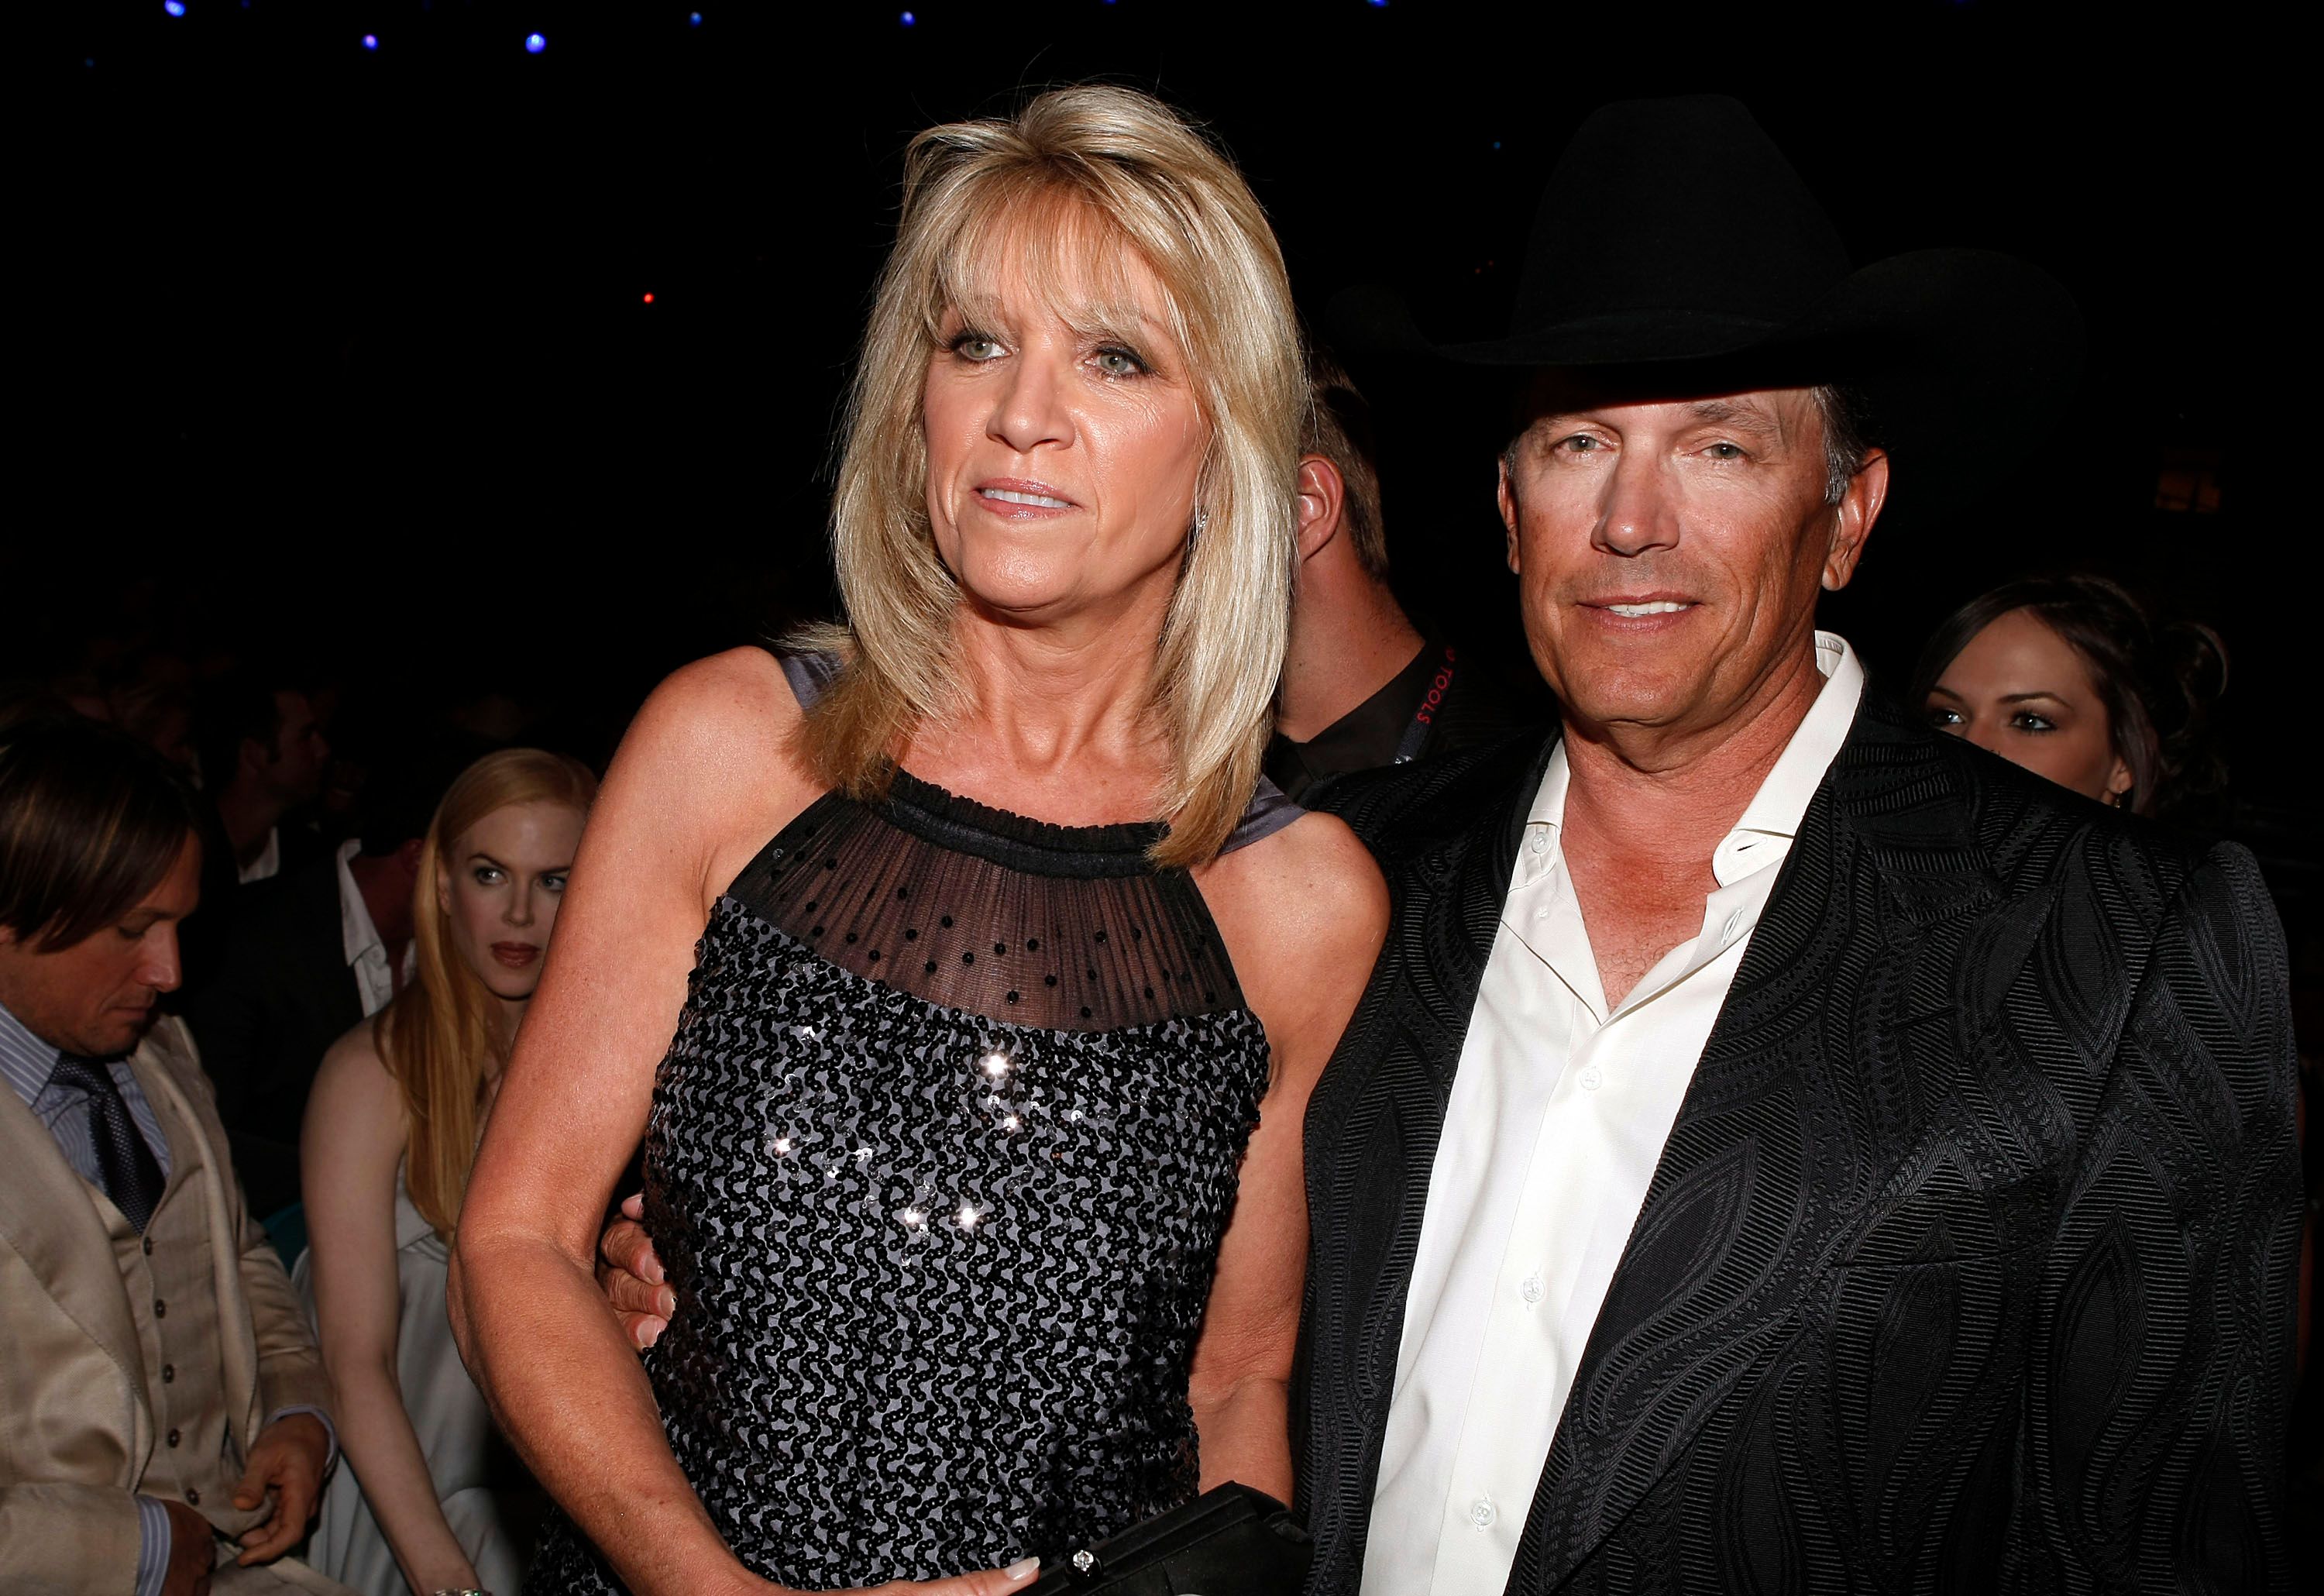 George and Norma Strait during the 44th annual Academy Of Country Music Awards held at the MGM Grand on April 5, 2009 in Las Vegas, Nevada | Source: Getty Images